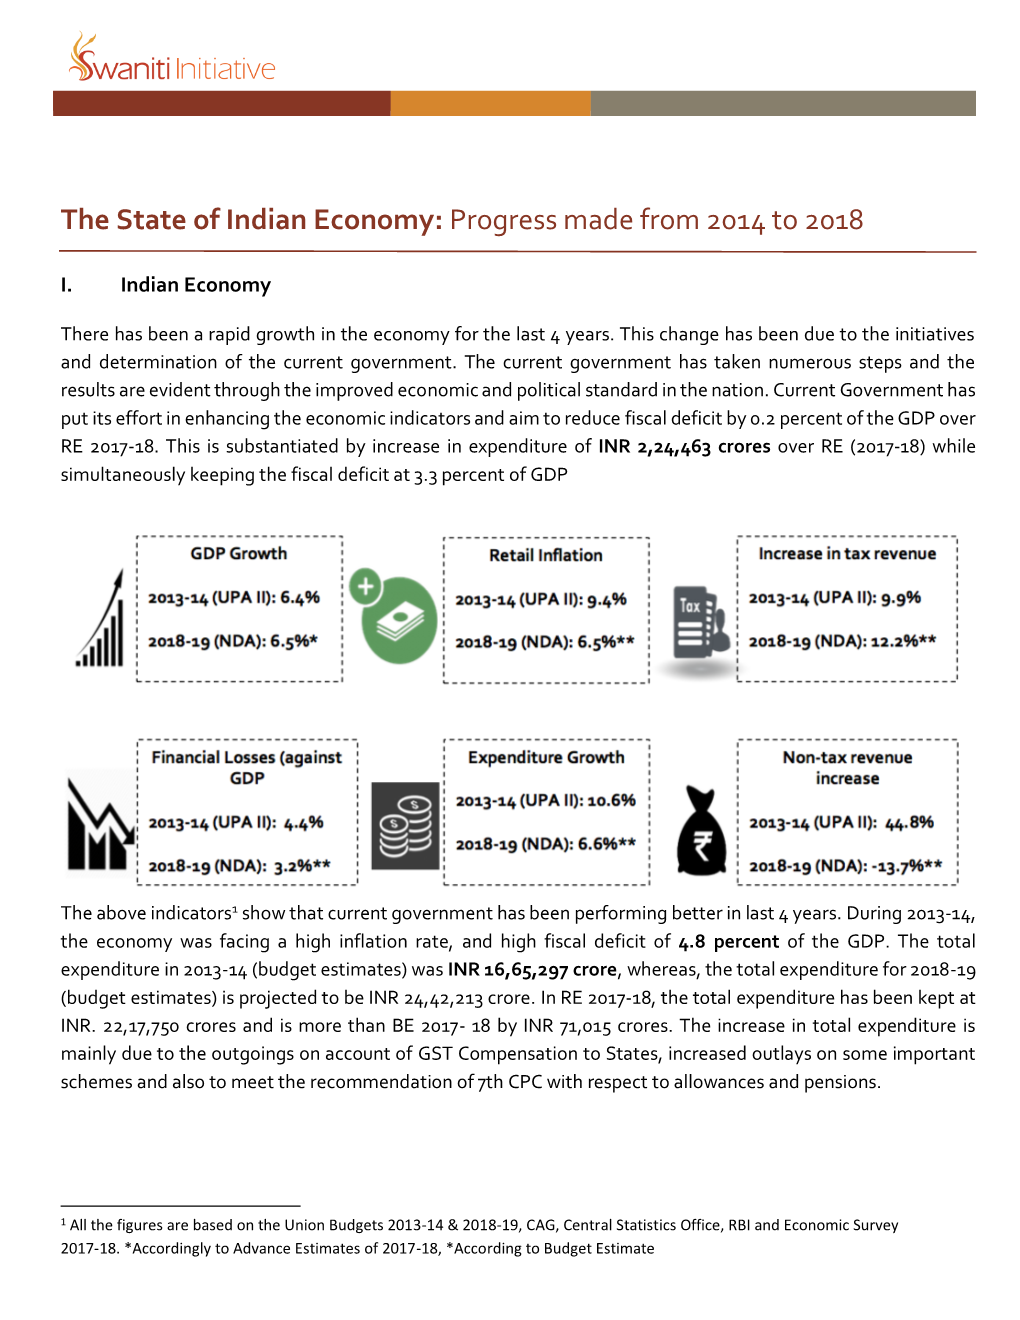 The State of Indian Economy: Progress Made from 2014 to 2018